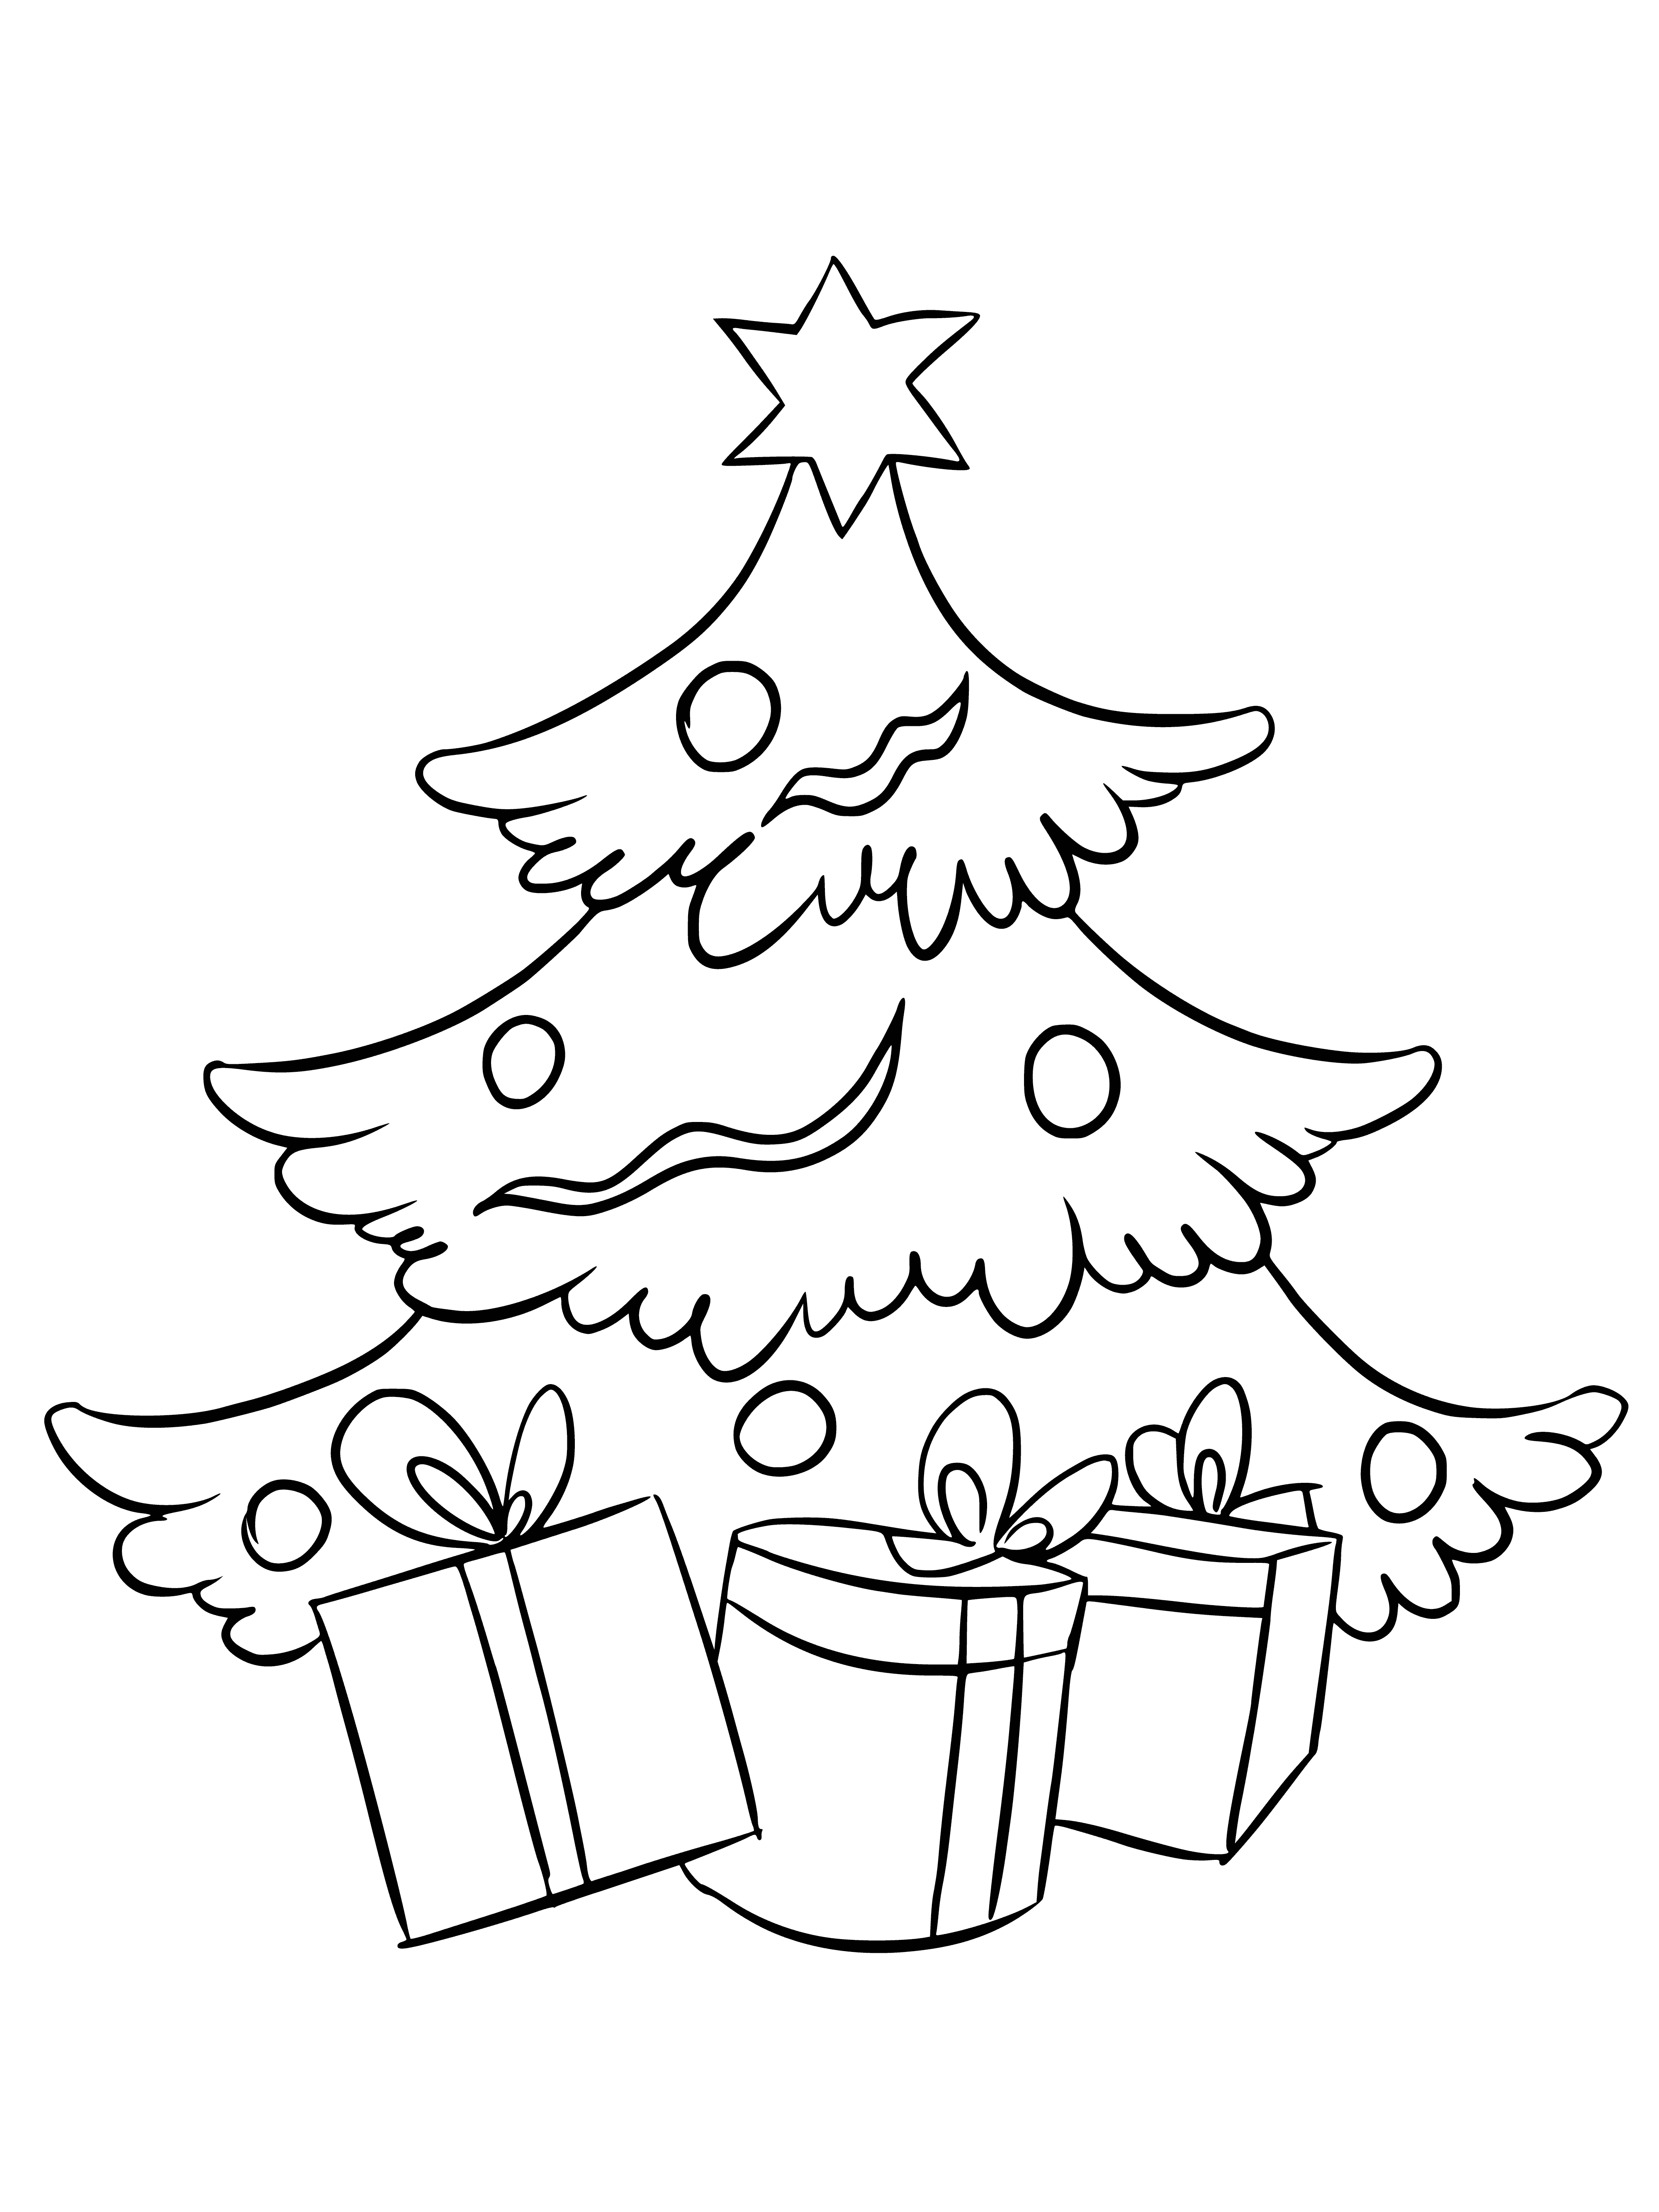 coloring page: Christmas tree is in the middle adorned with lights & ornaments, gifts piled at the base.